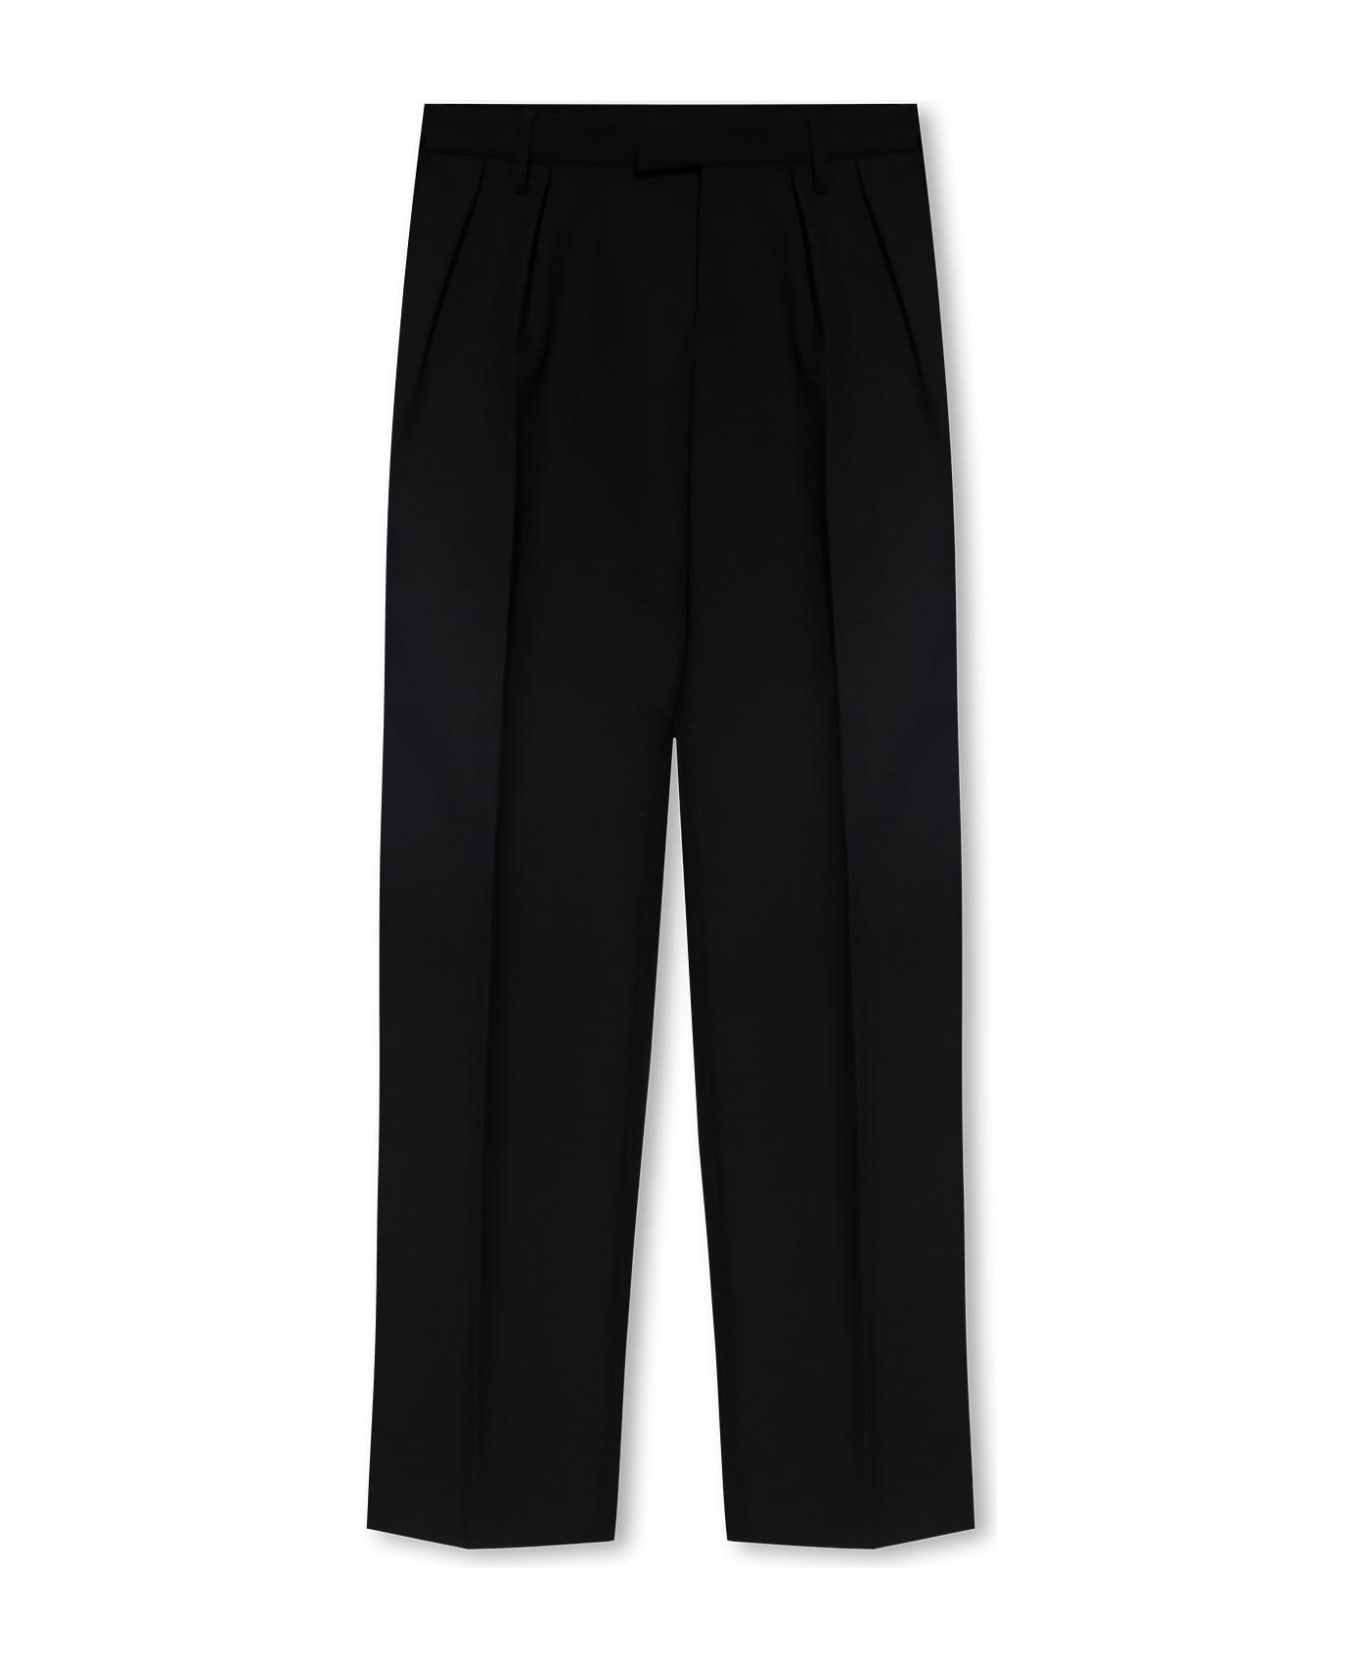 Gucci Wool Trousers - Black ボトムス